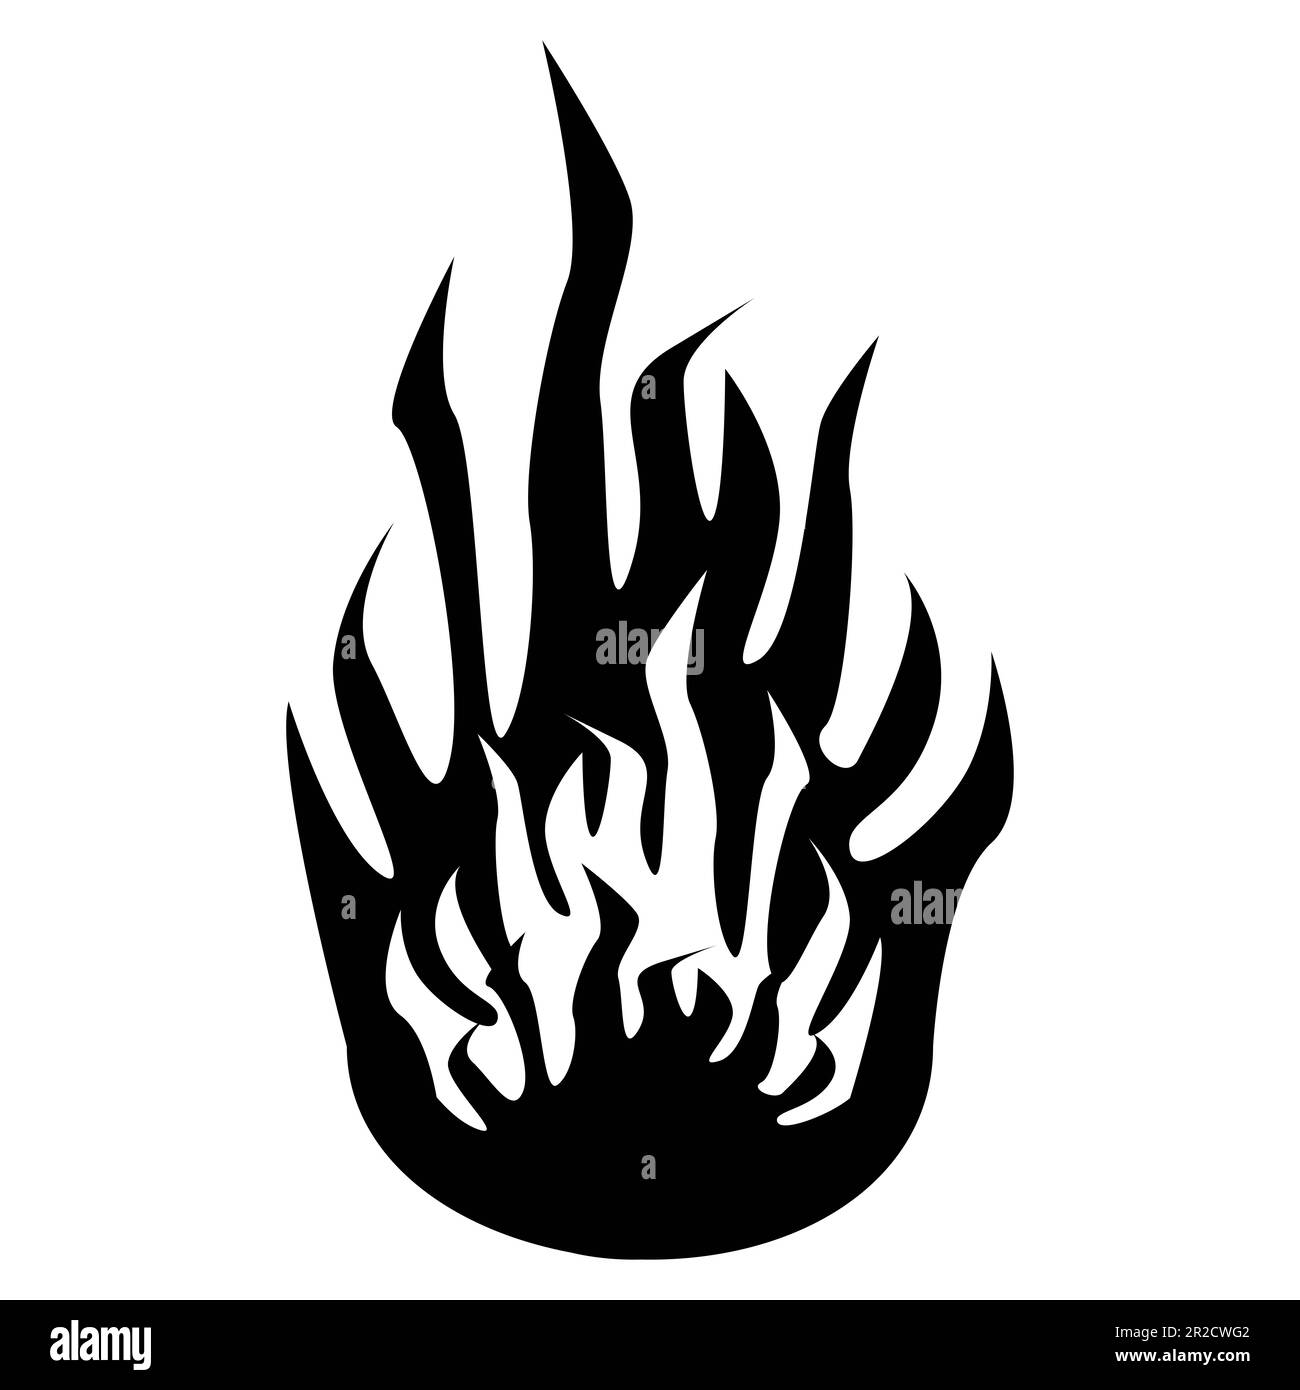 Flame silhouette. Burning elements. Fire sign. Illustration on a white ...